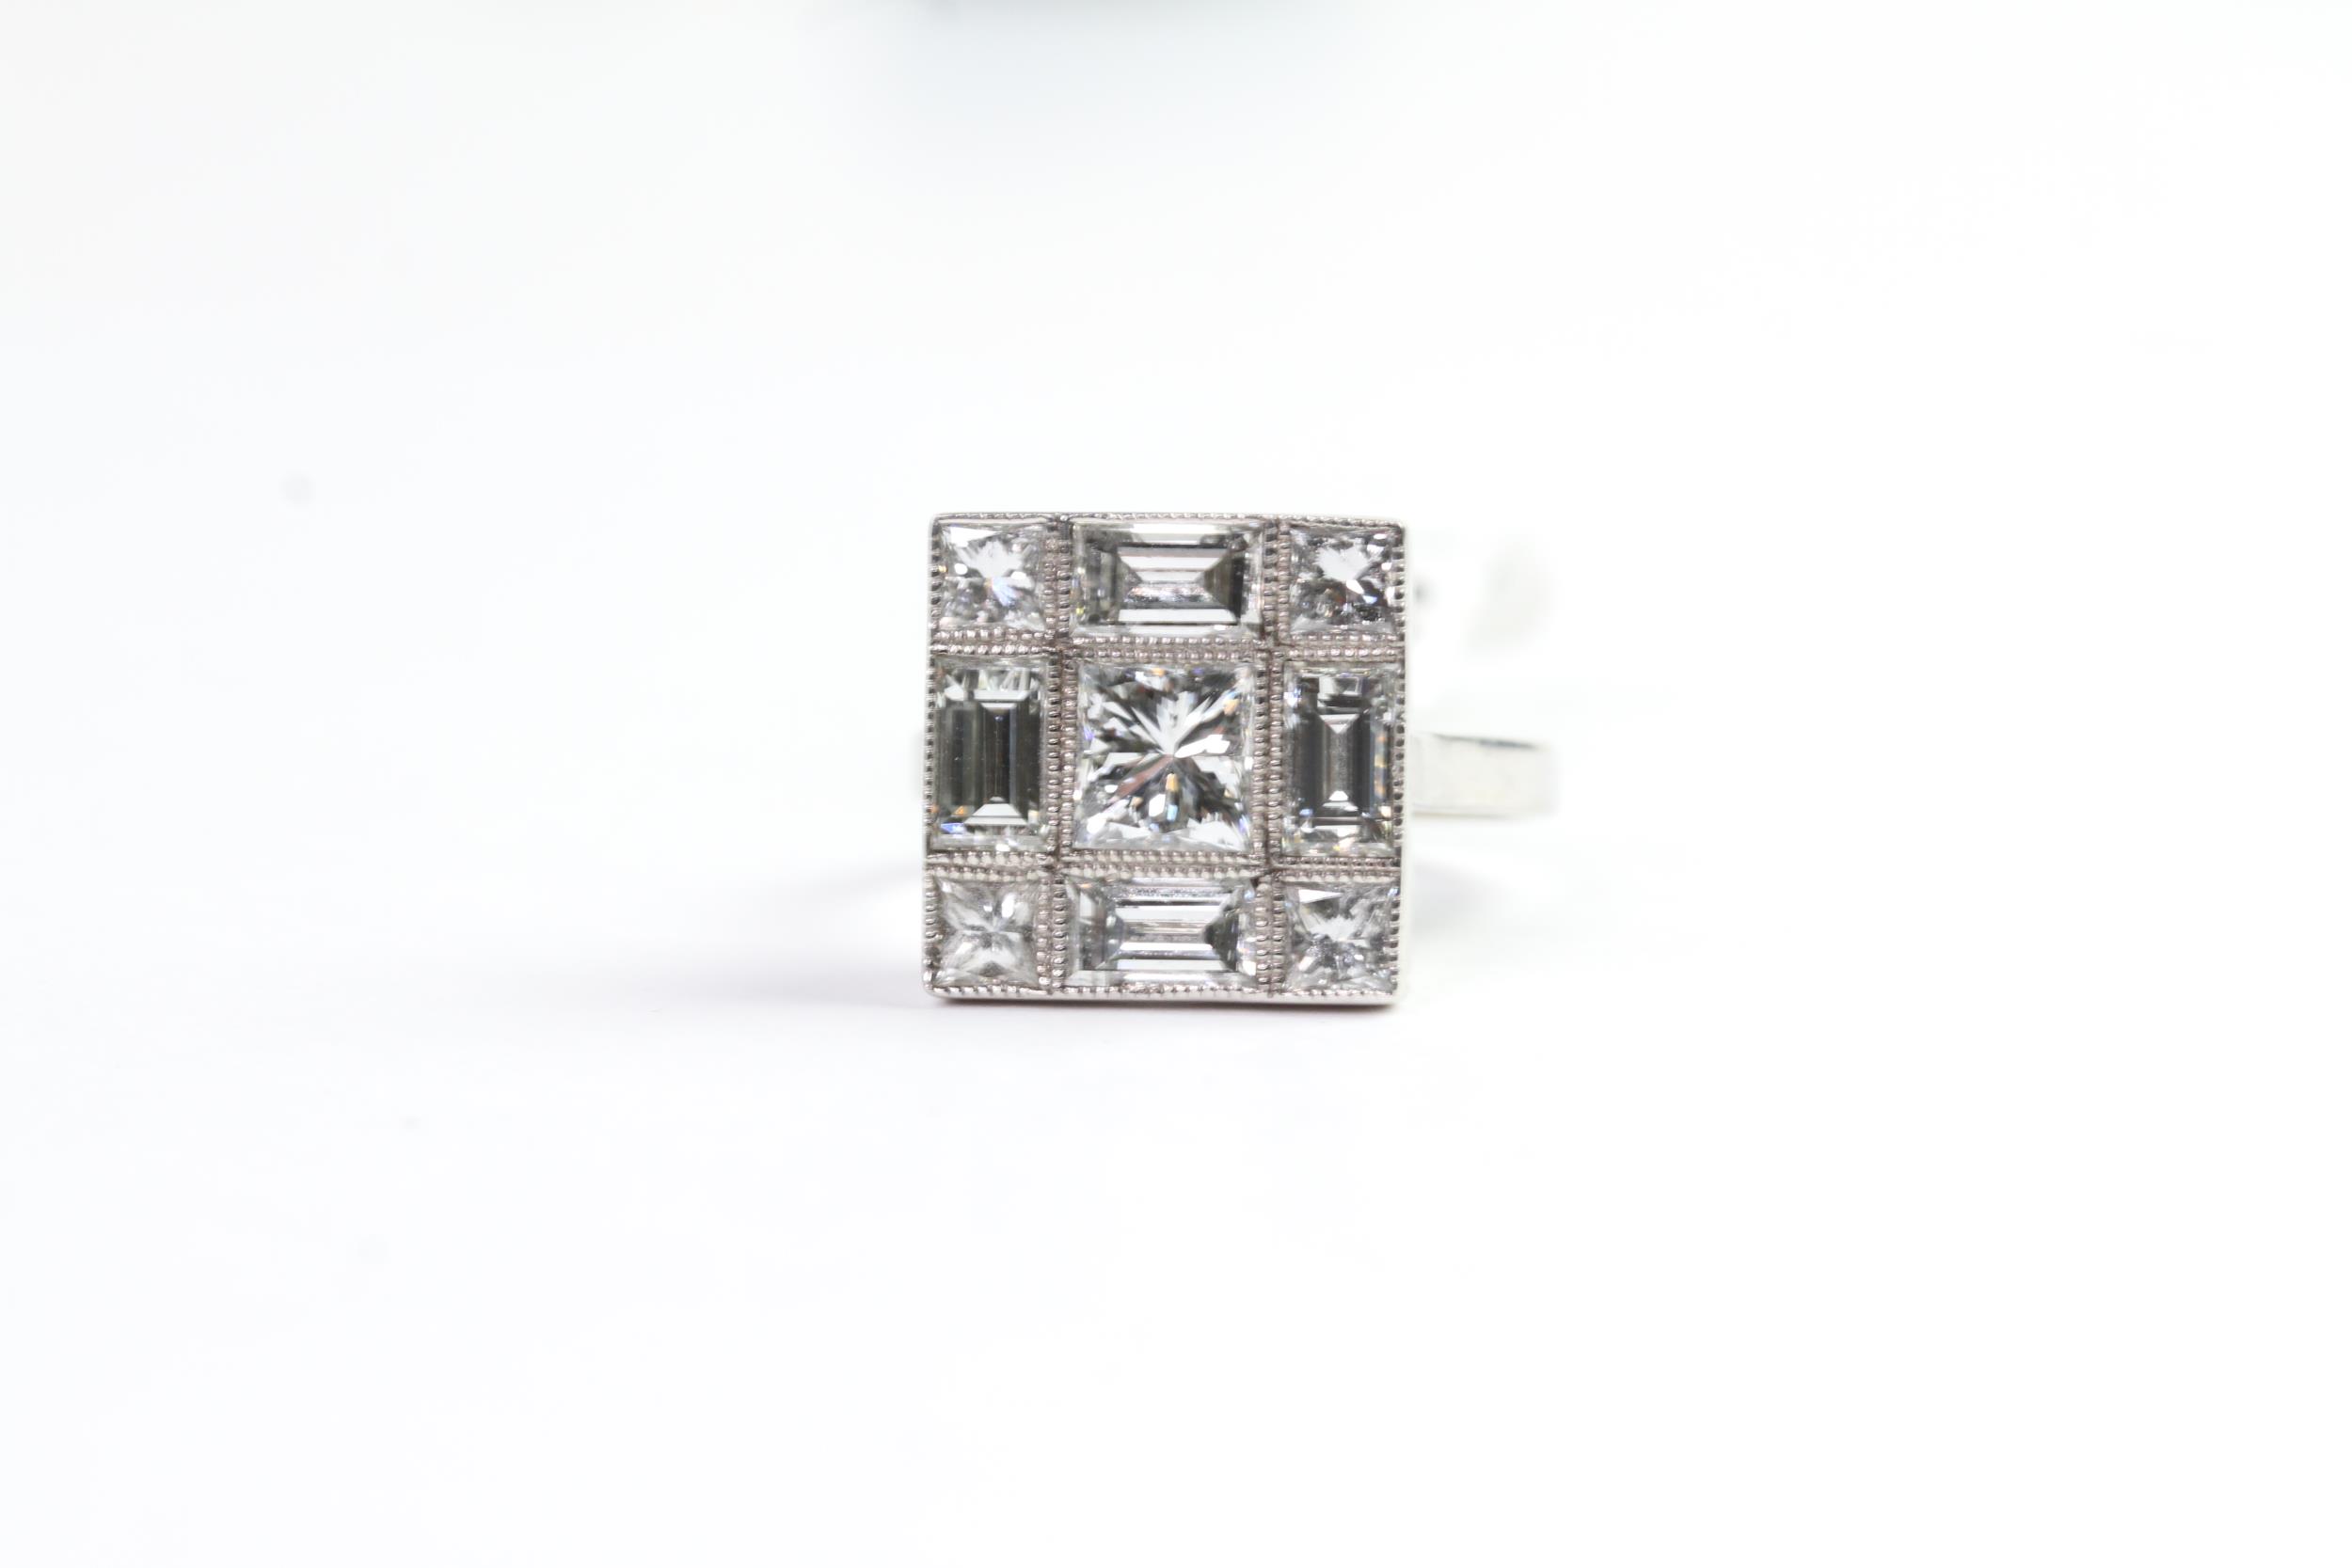 2.40ct Diamond Tablet Ring, Princess cut and Emerald Cut Diamonds, estimated total weight 2.40ct, - Image 2 of 4